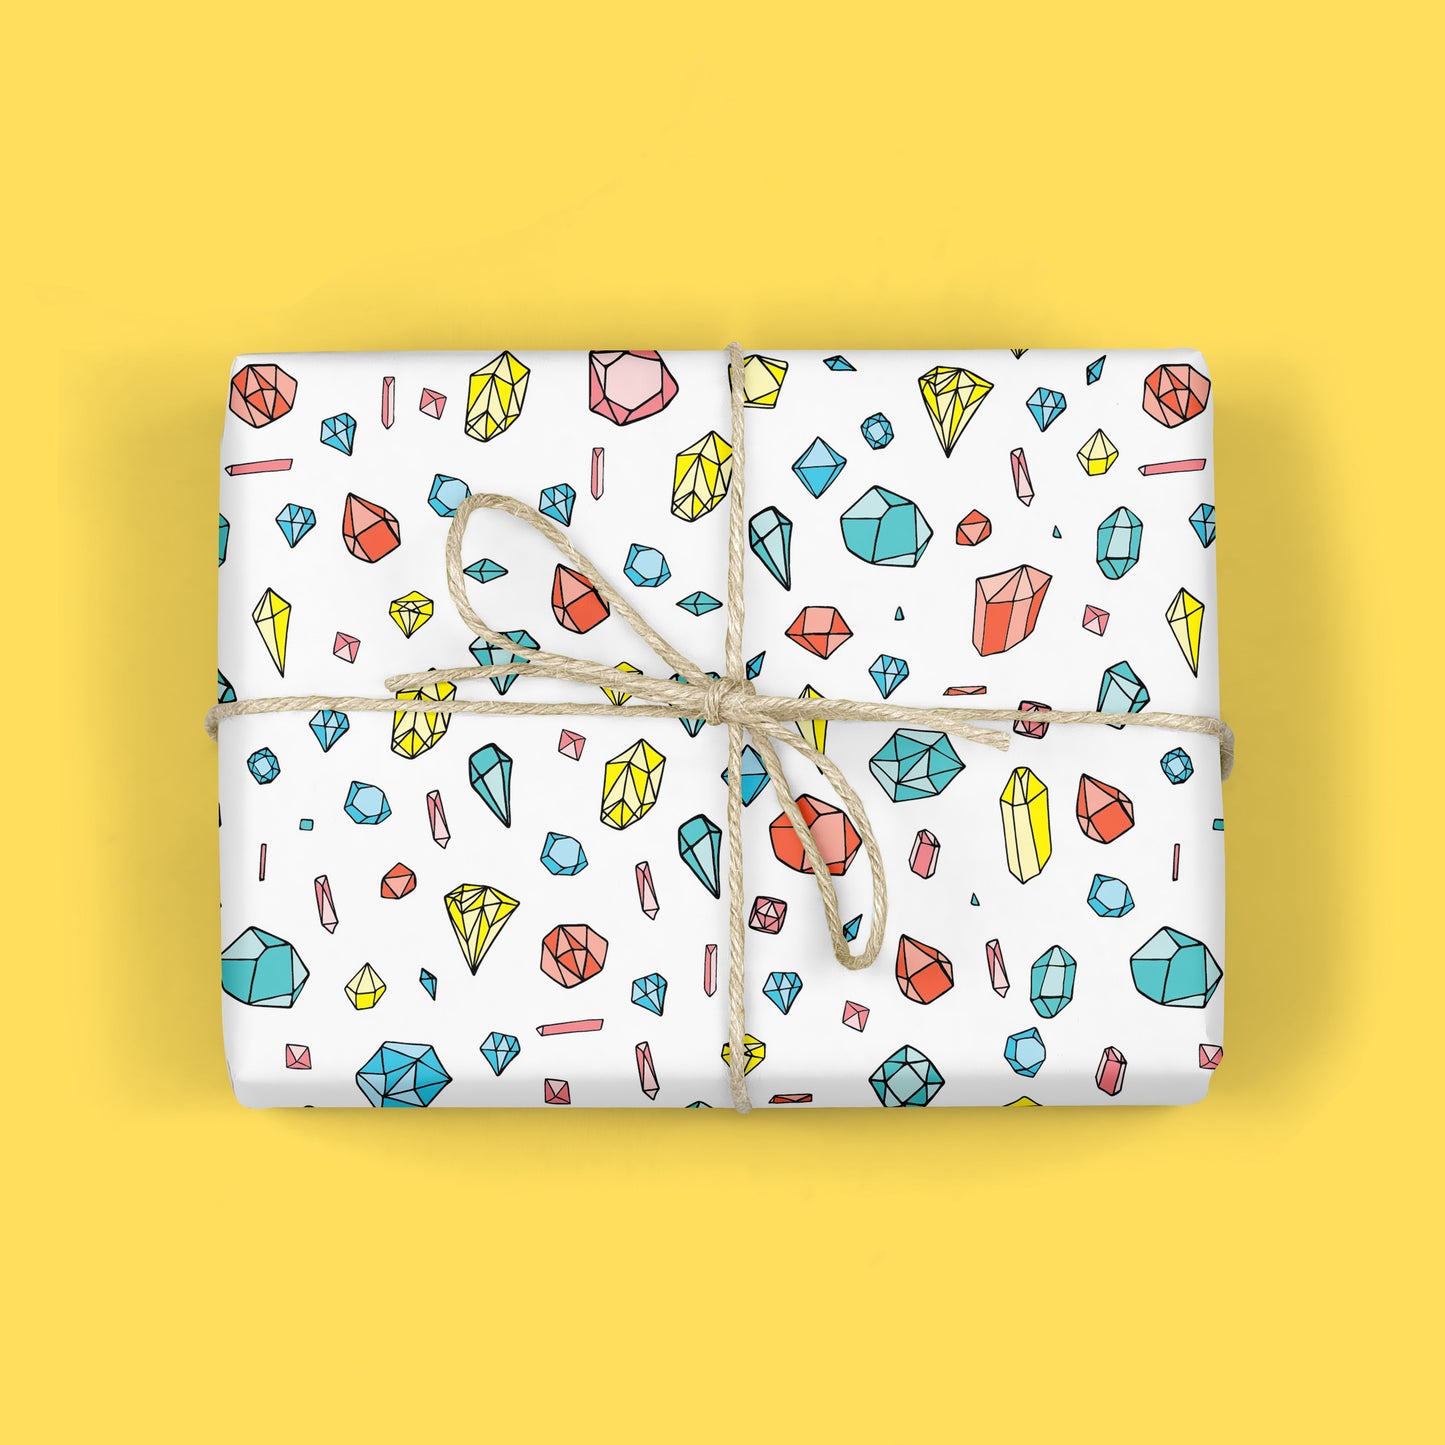 GEMS AND CRYSTALS GIFT WRAP